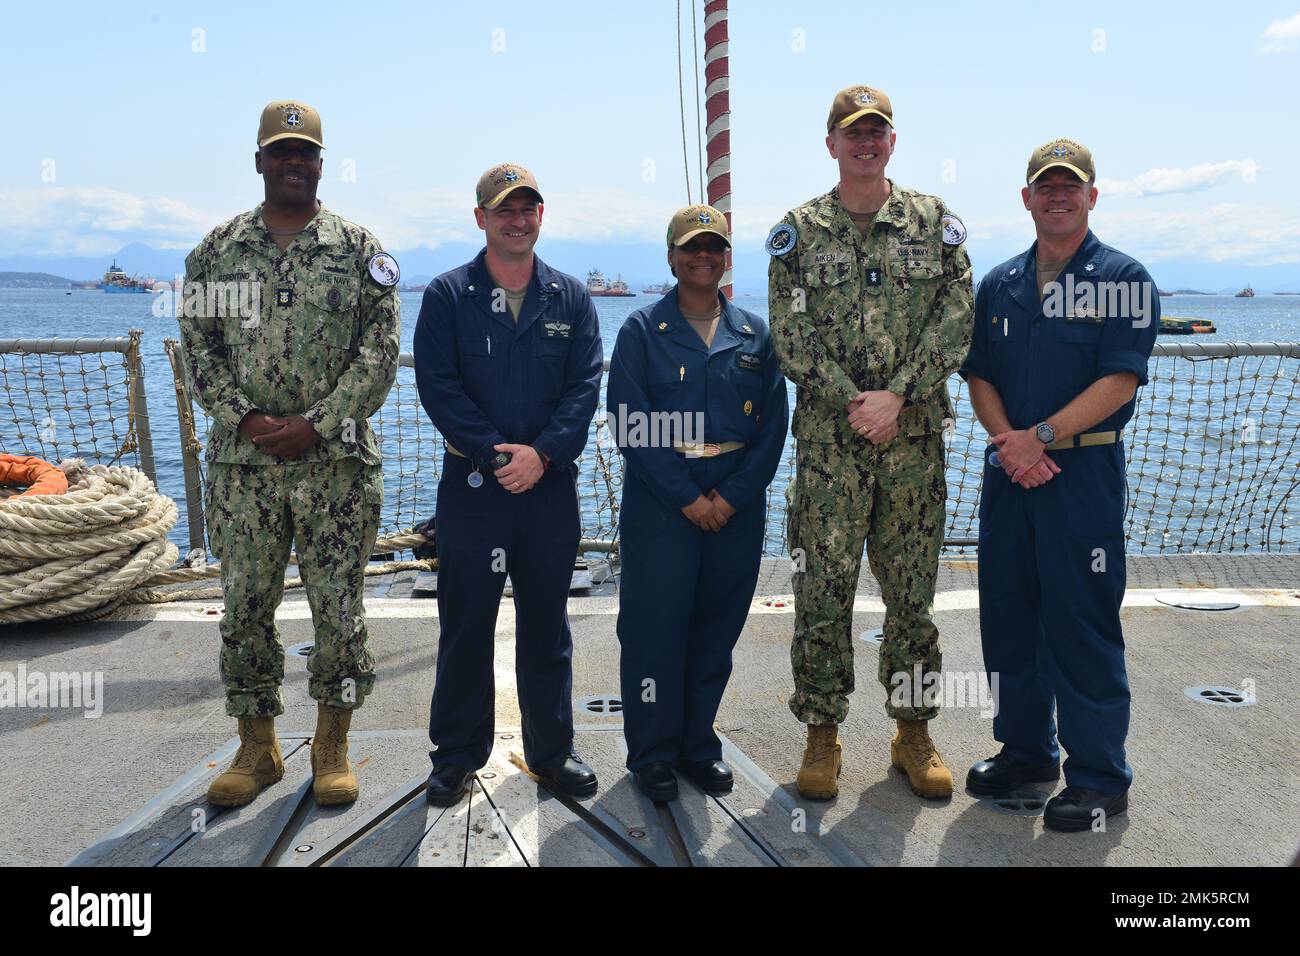 RIO DE JANEIRO (Sept. 6, 2022) Command Master Chief of U.S. Naval Forces Southern Command/U.S. 4th Fleet Robert Florentino, Cmdr. Ryan Pierce, executive officer of the Arleigh Burke-class guided-missile destroyer USS Lassen (DDG 82), Command Master Chief Sherita Jackson, Lassen’s senior enlisted leader, Rear Adm. Jim Aiken, commander of U.S. Naval Forces Southern Command/U.S. 4th Fleet and Cmdr. Christopher Turmel, Lassen’s commanding officer, pose for a photo aboard the ship during UNITAS LXIII, Sept. 6, 2022. UNITAS is the world’s longest-running maritime exercise. Hosted this year by Brazil Stock Photo